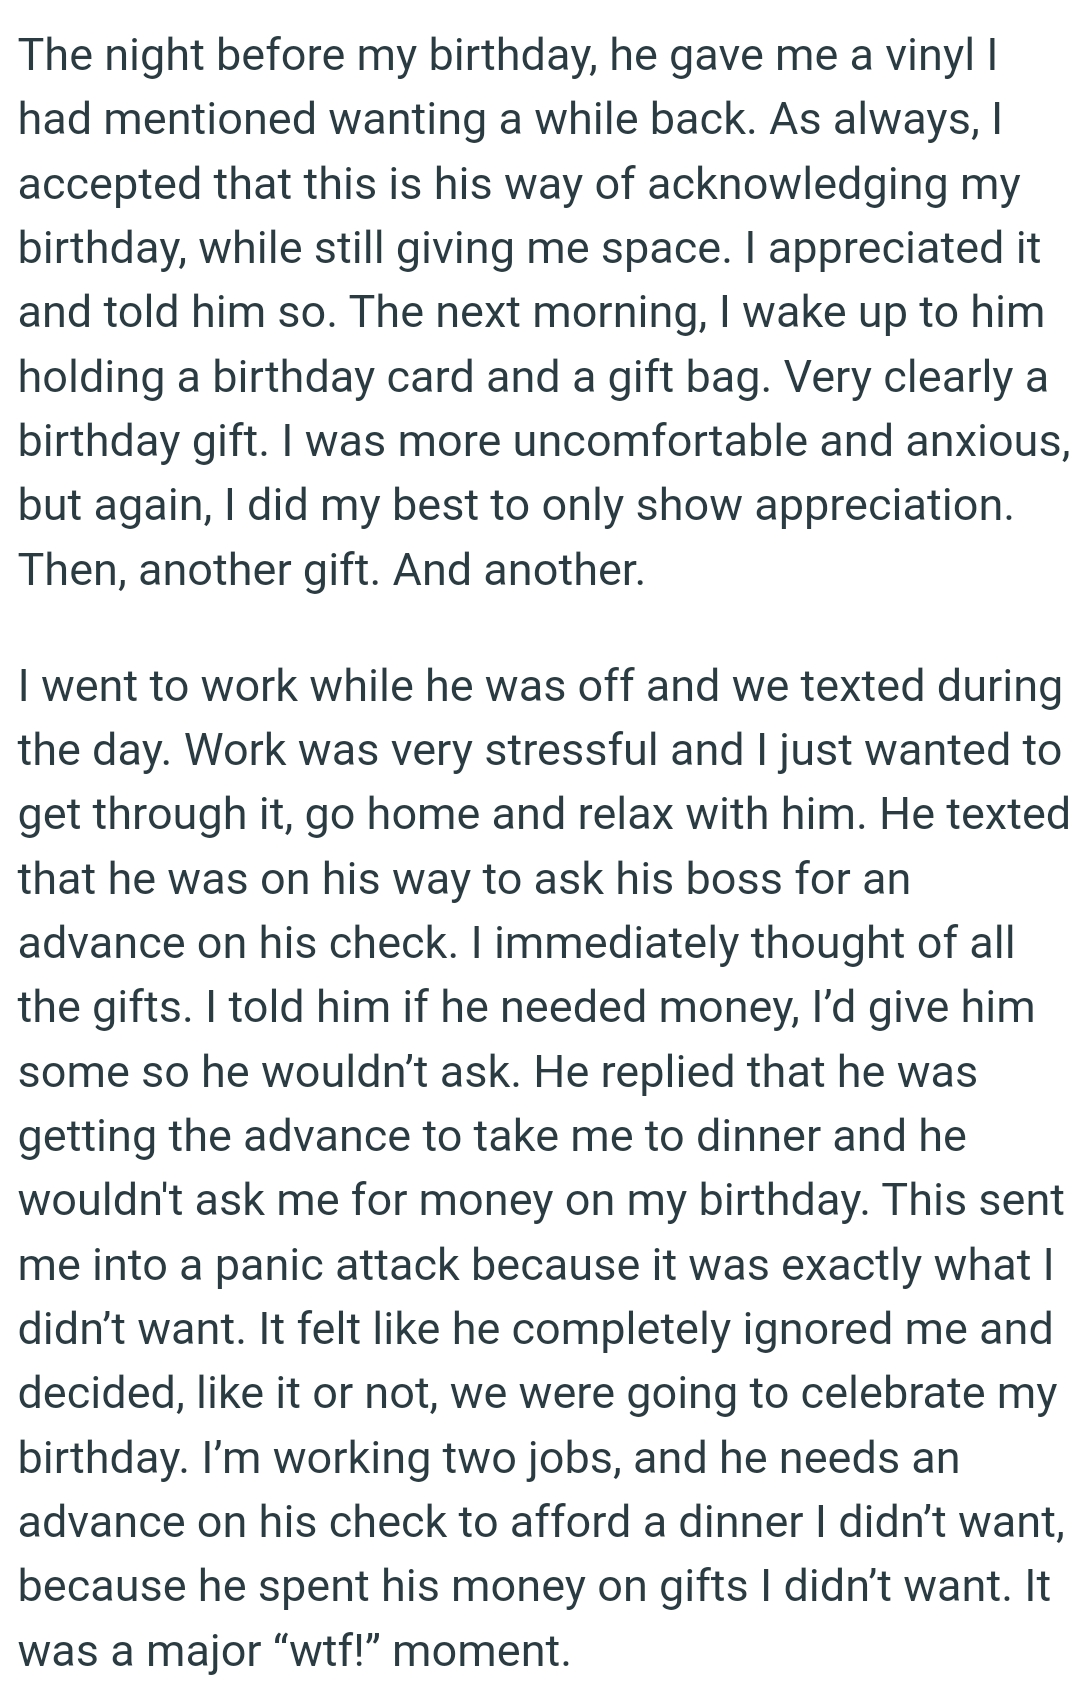 The OP woke up to him holding a birthday card and a gift bag